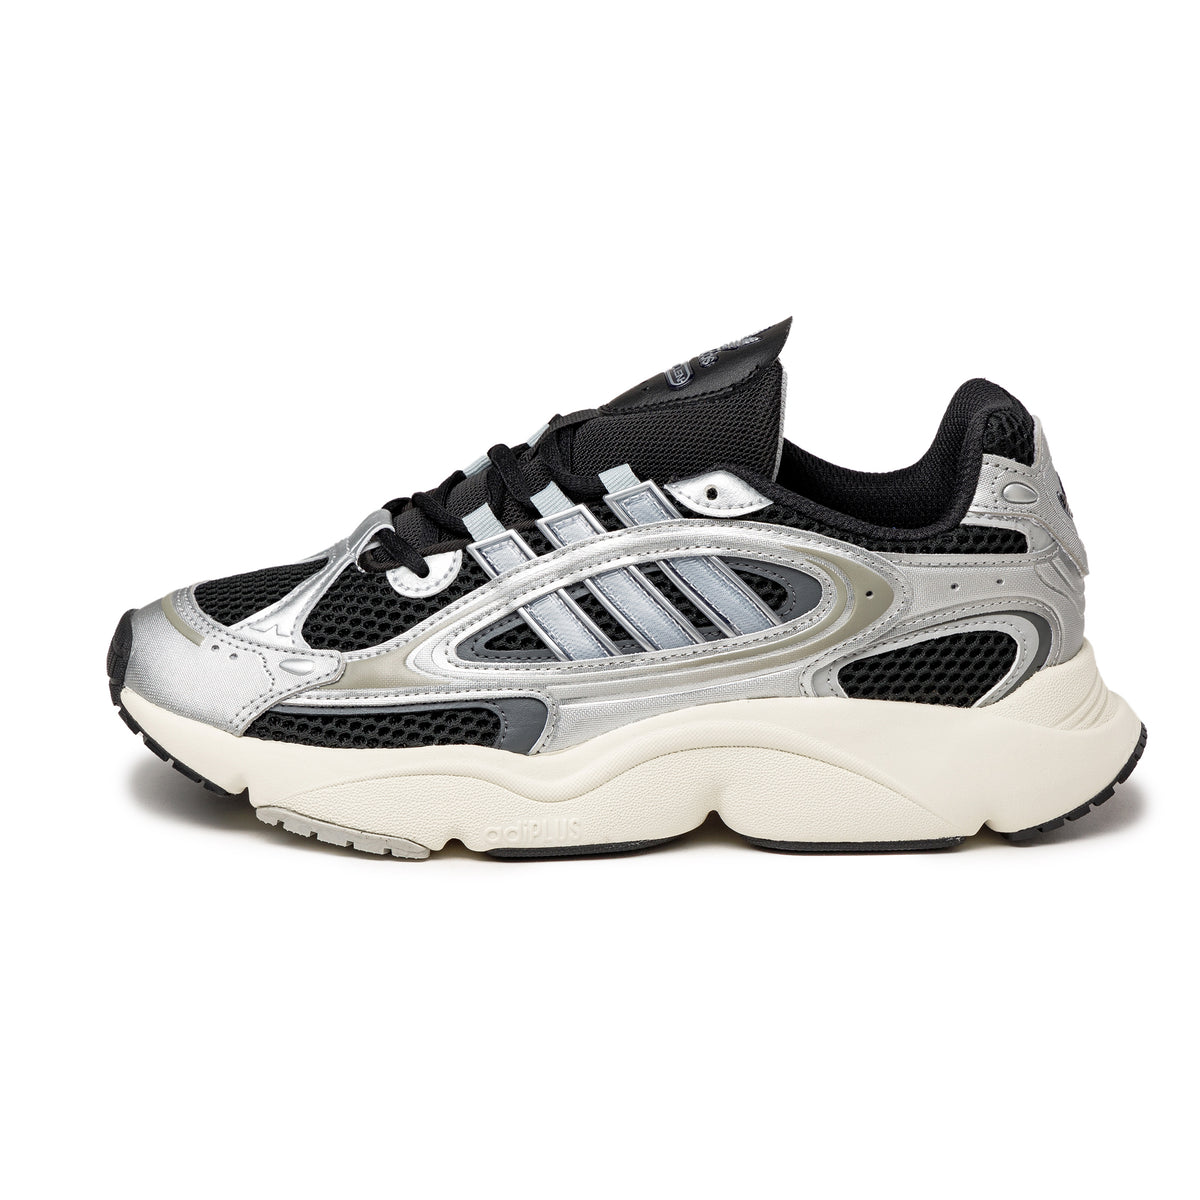 Adidas Ozmillen – buy now at Asphaltgold Online Store!